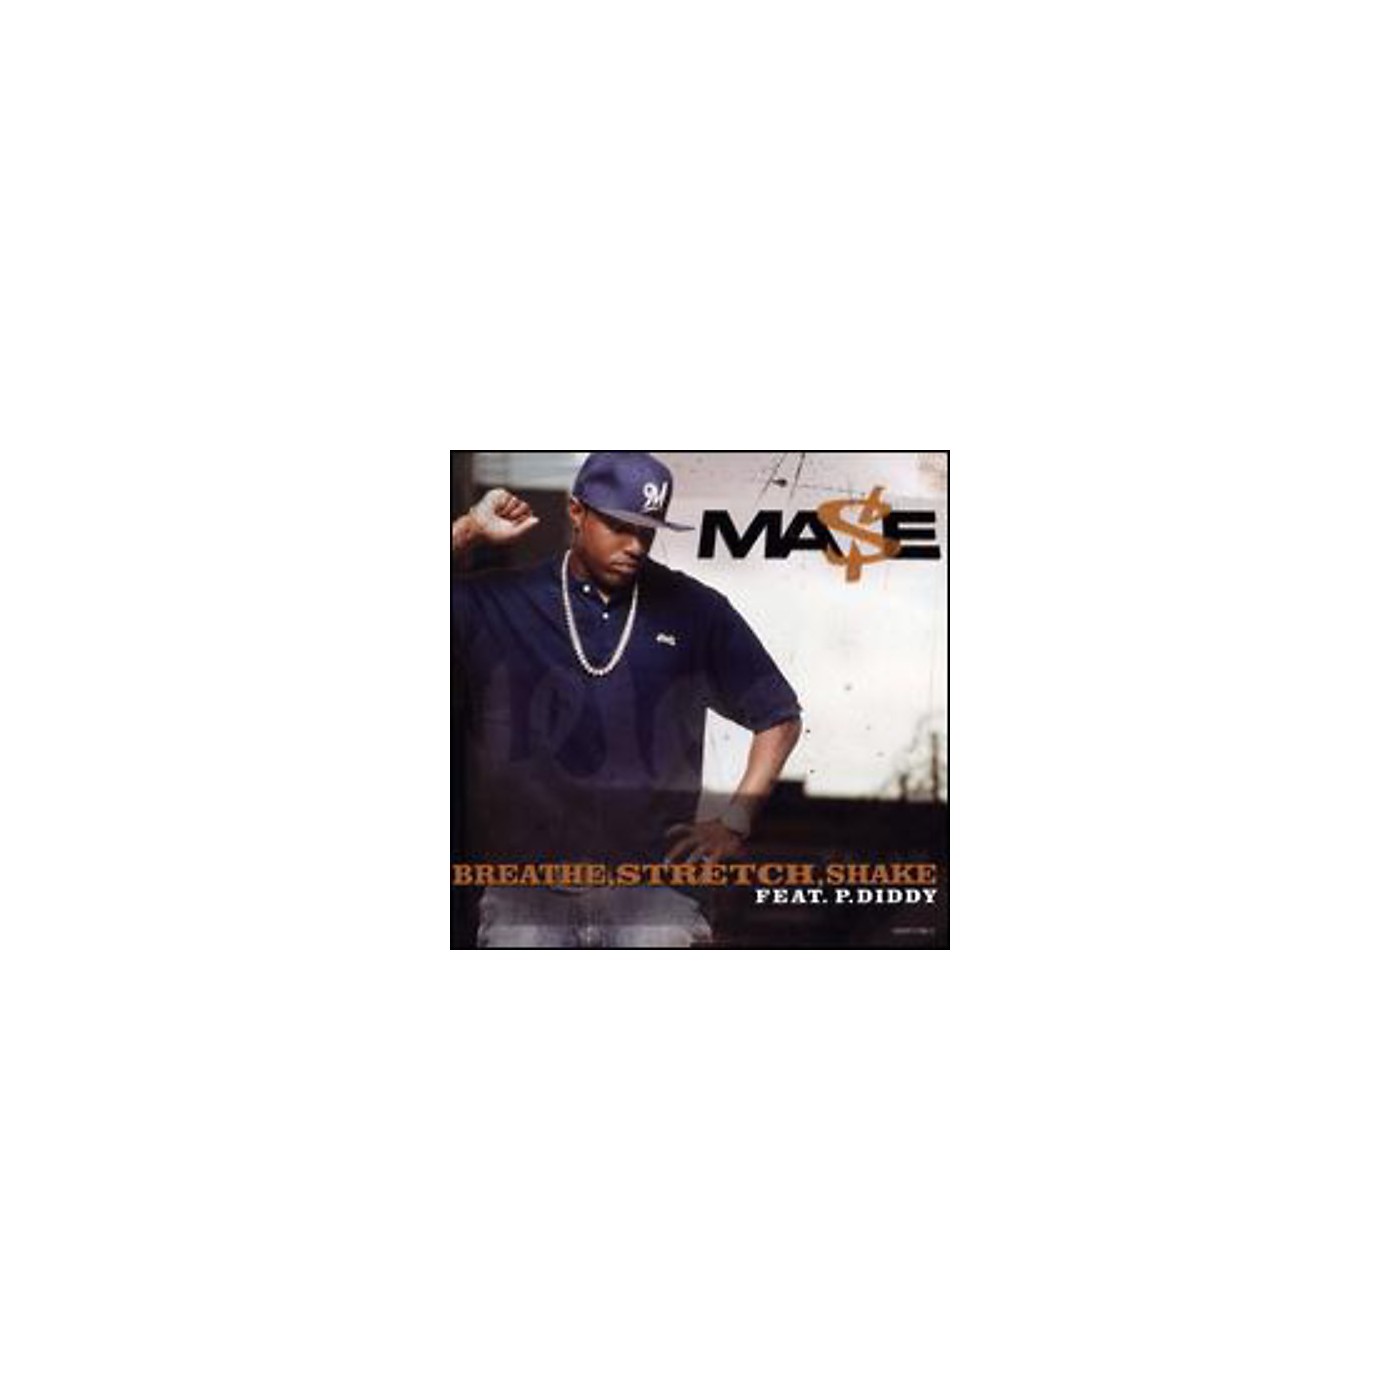 mase welcome back download